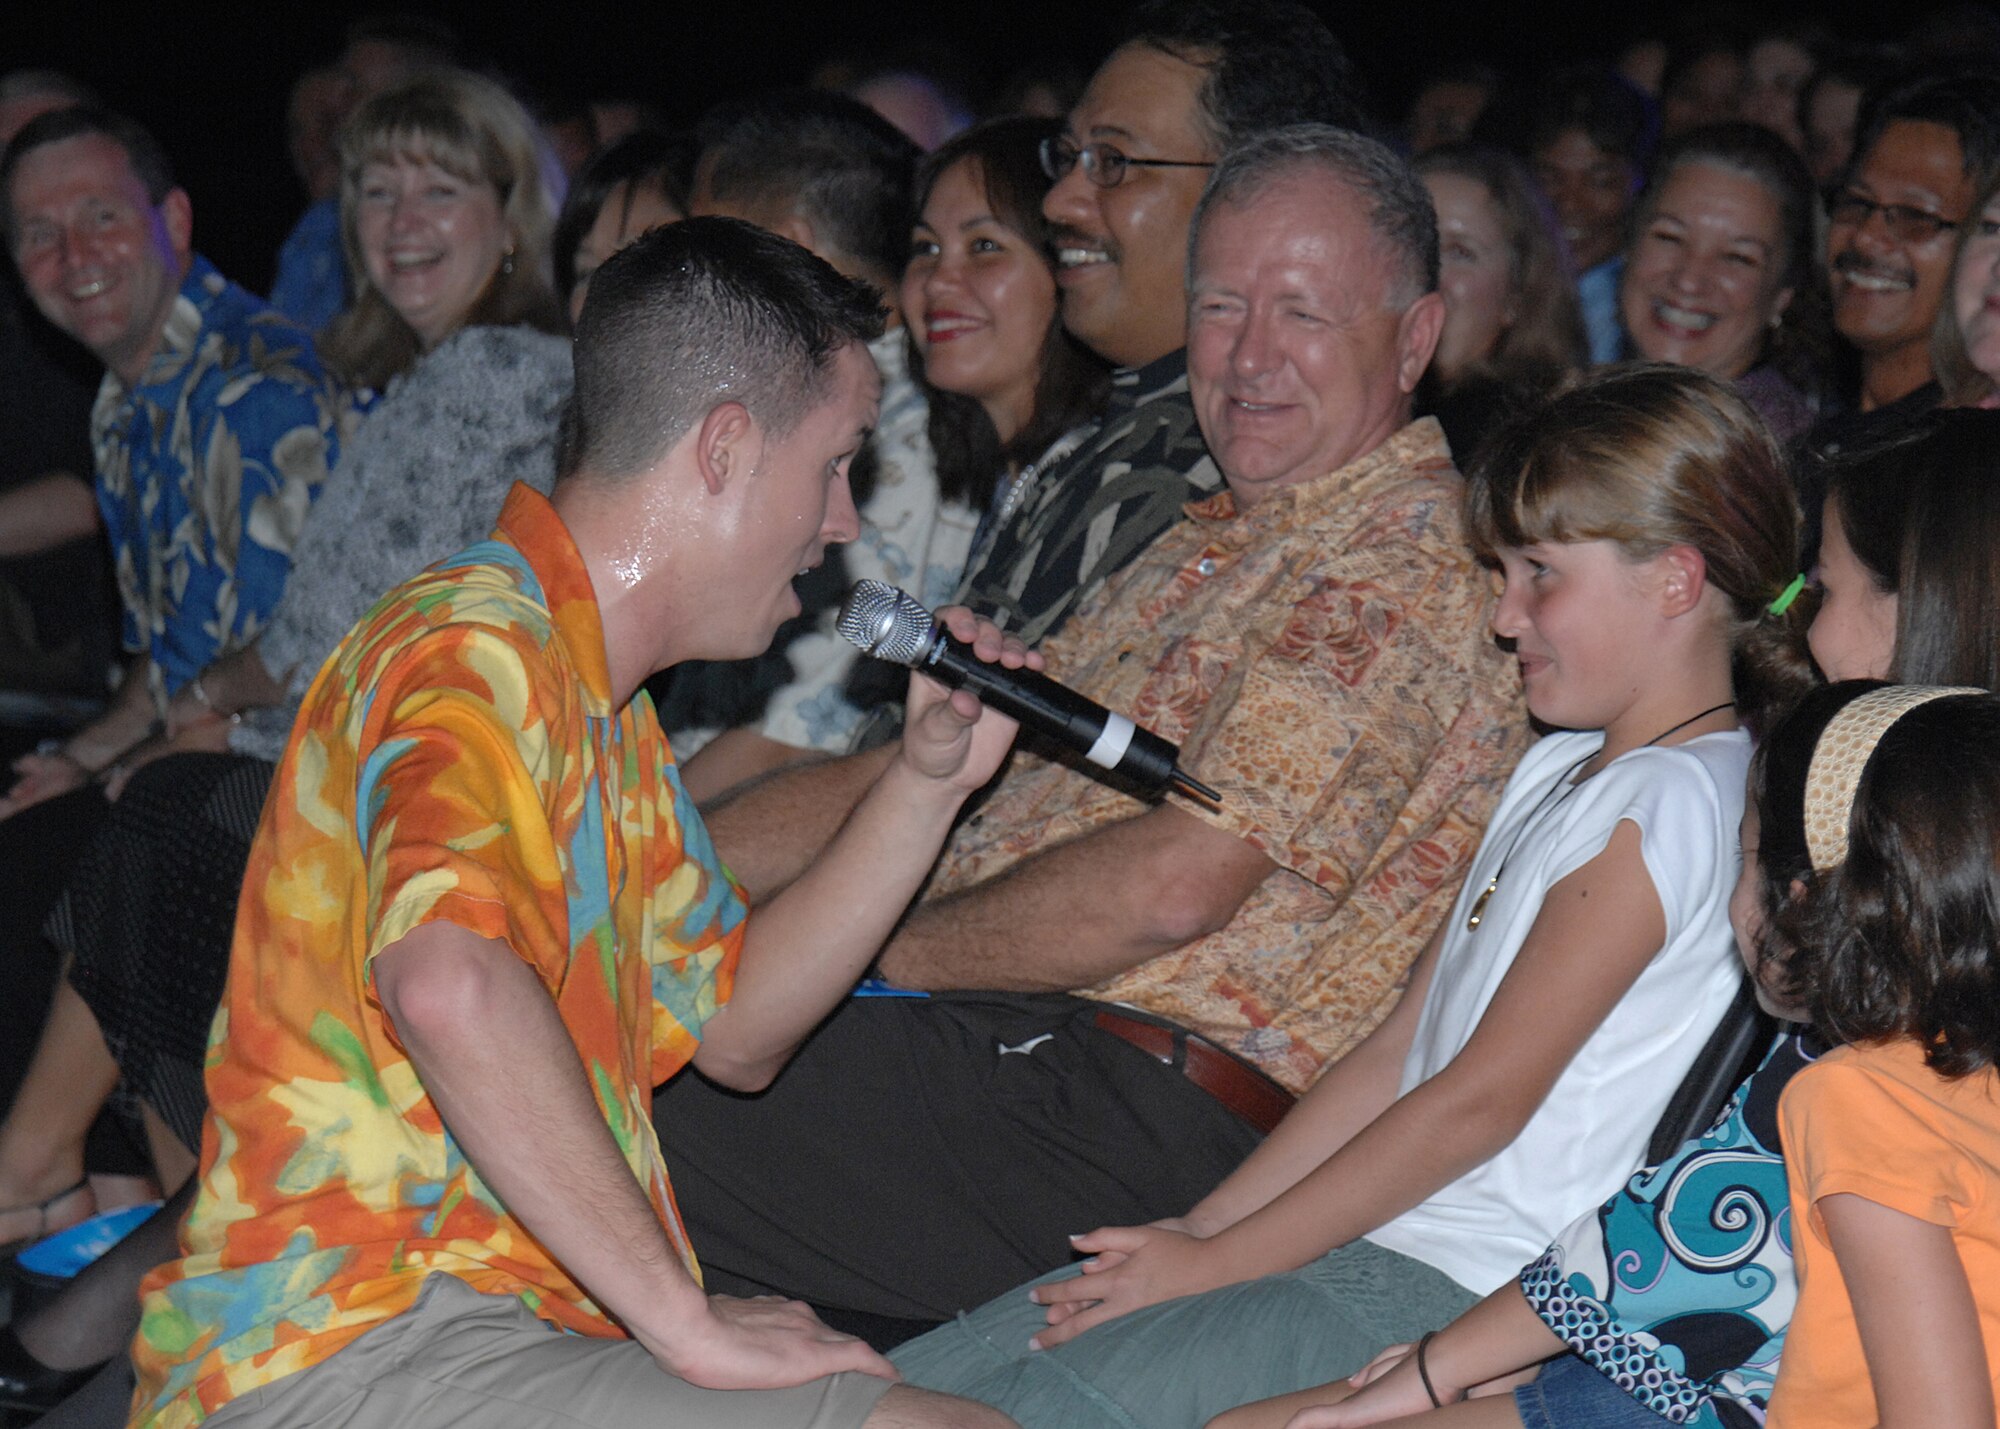 Senior Airman Benjamin Taylor sings to a young girl in the audience during the Tops In Blue performance here Jan. 3. (U.S. Air Force photo/Senior Airman Sonya Padilla)